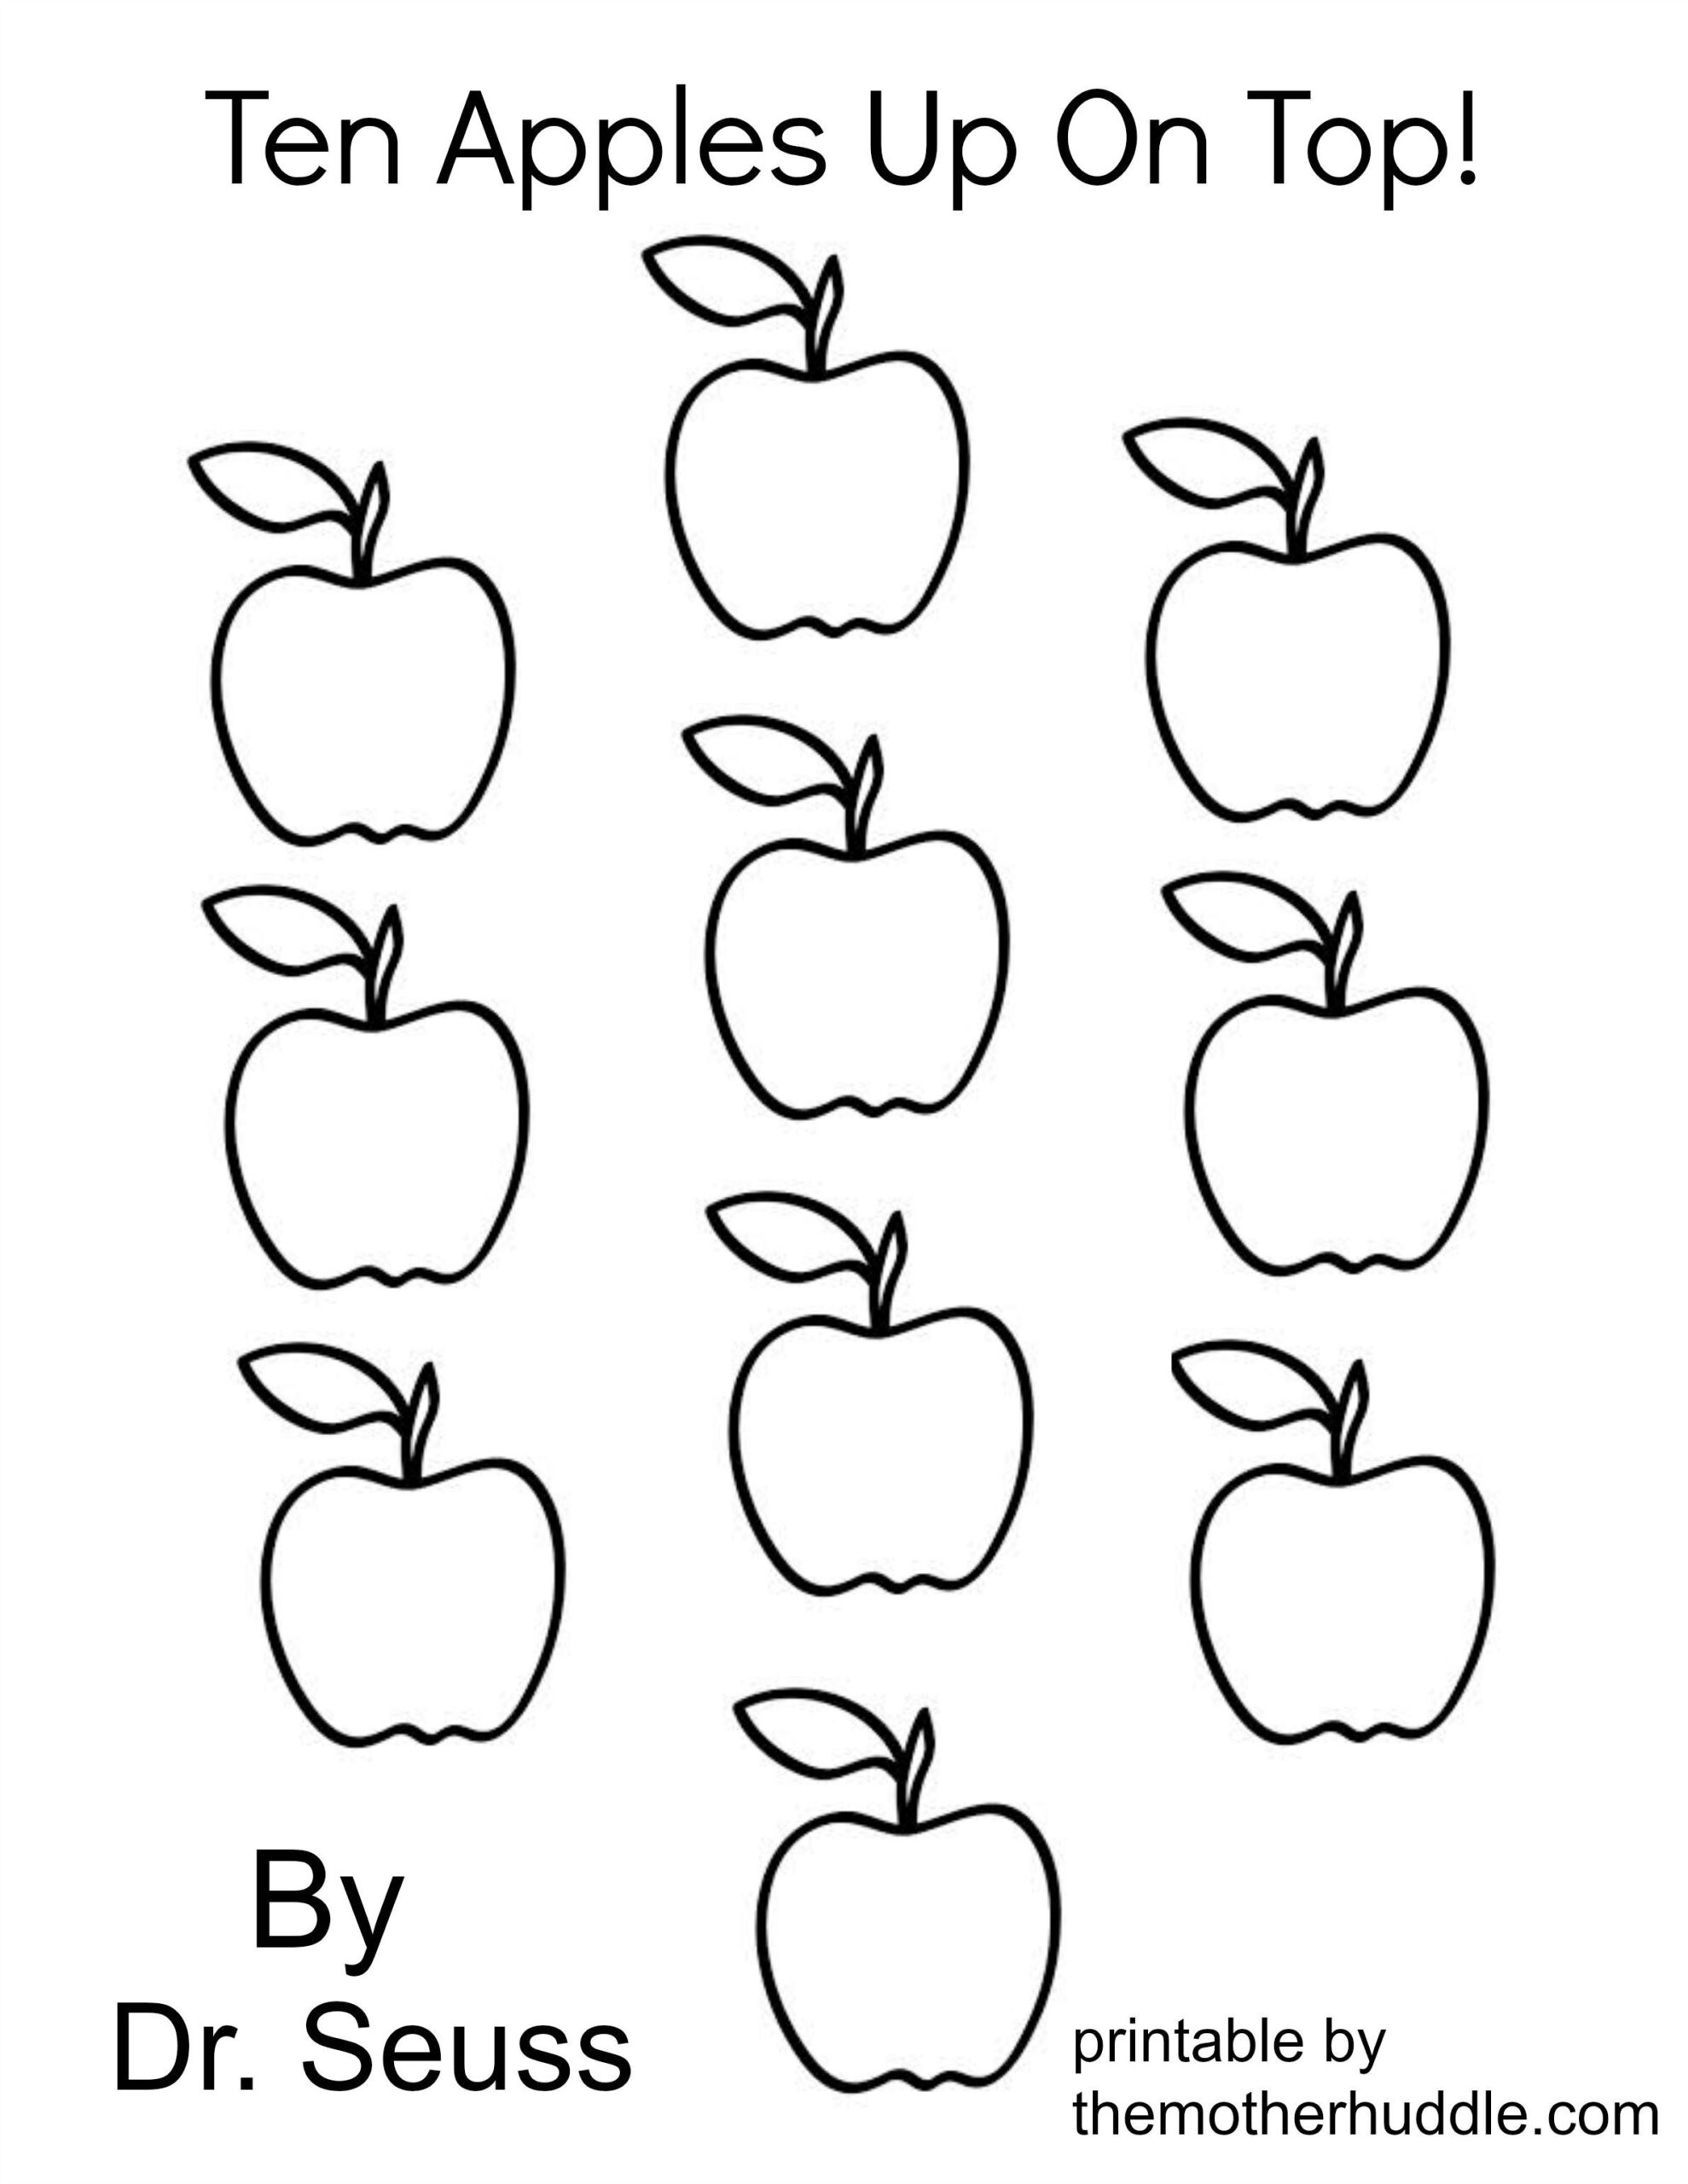 Ten Apples Up On Top Coloring Pages AZ Coloring Pages Dr Seuss Coloring Pages Dr Seuss Crafts Seuss Crafts